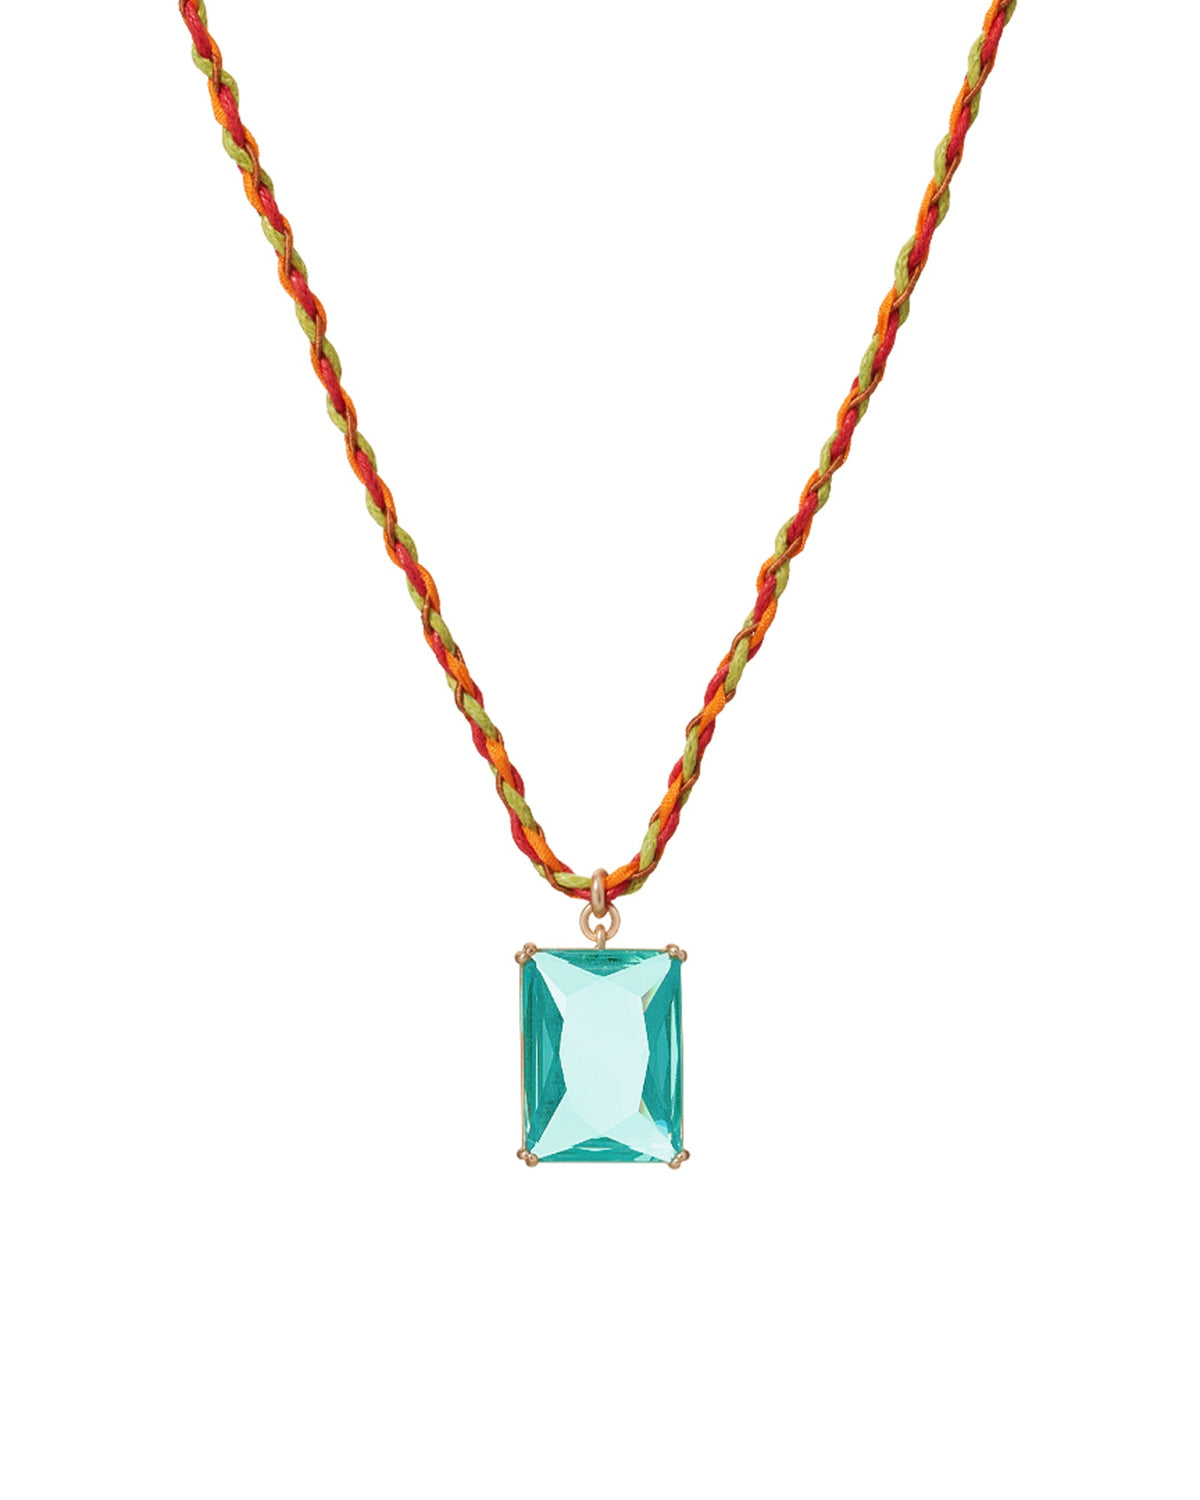 Let's Get It On Necklace in Aqua